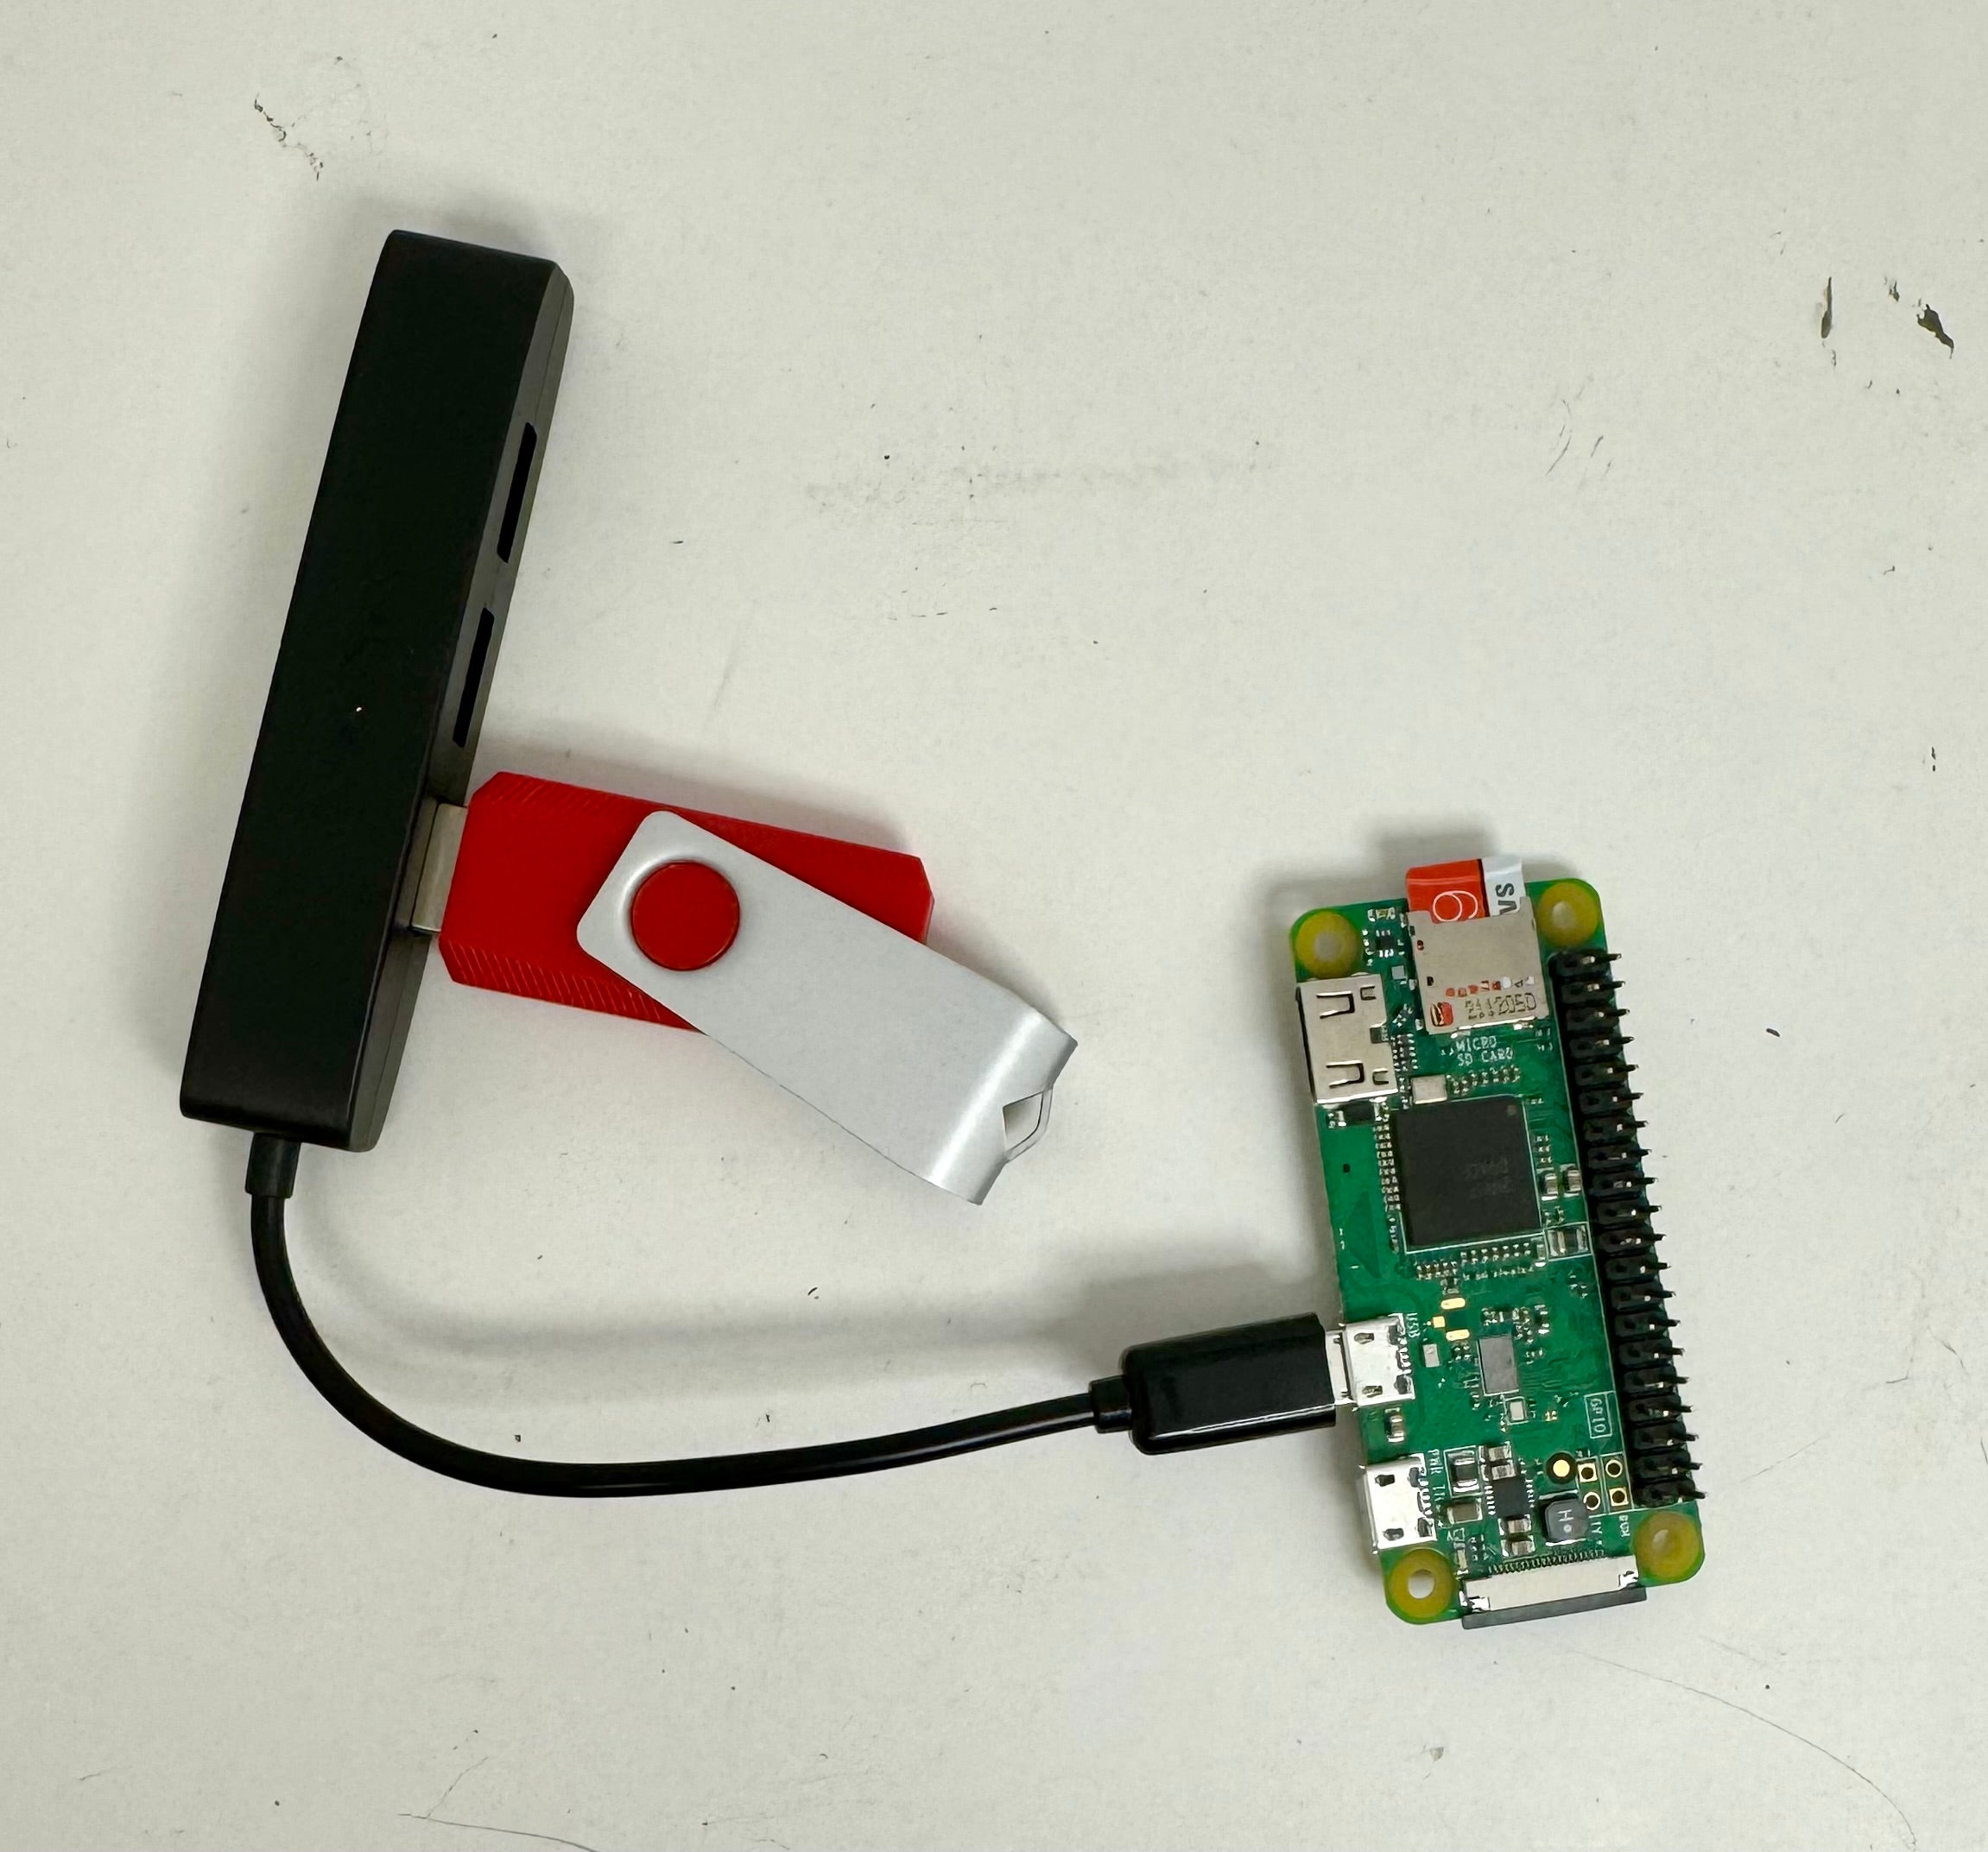 USB stick plugged directly into the Pi with an micro-usb adaptor